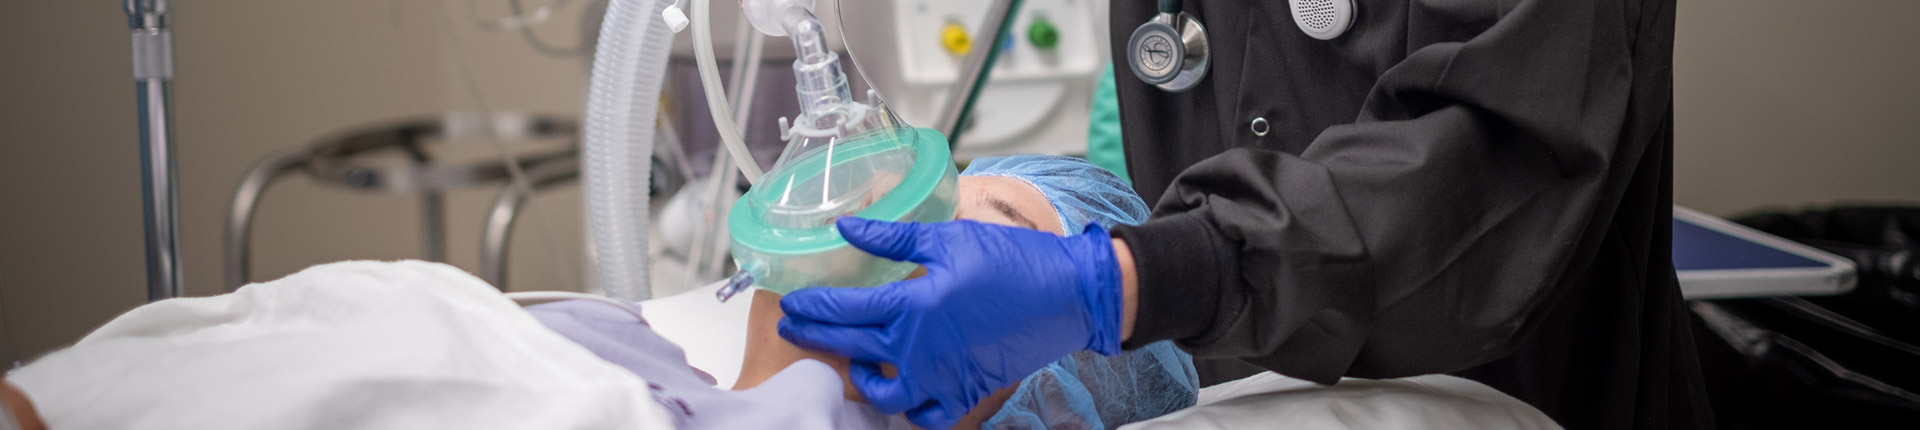 anesthesiologist administering anesthesia